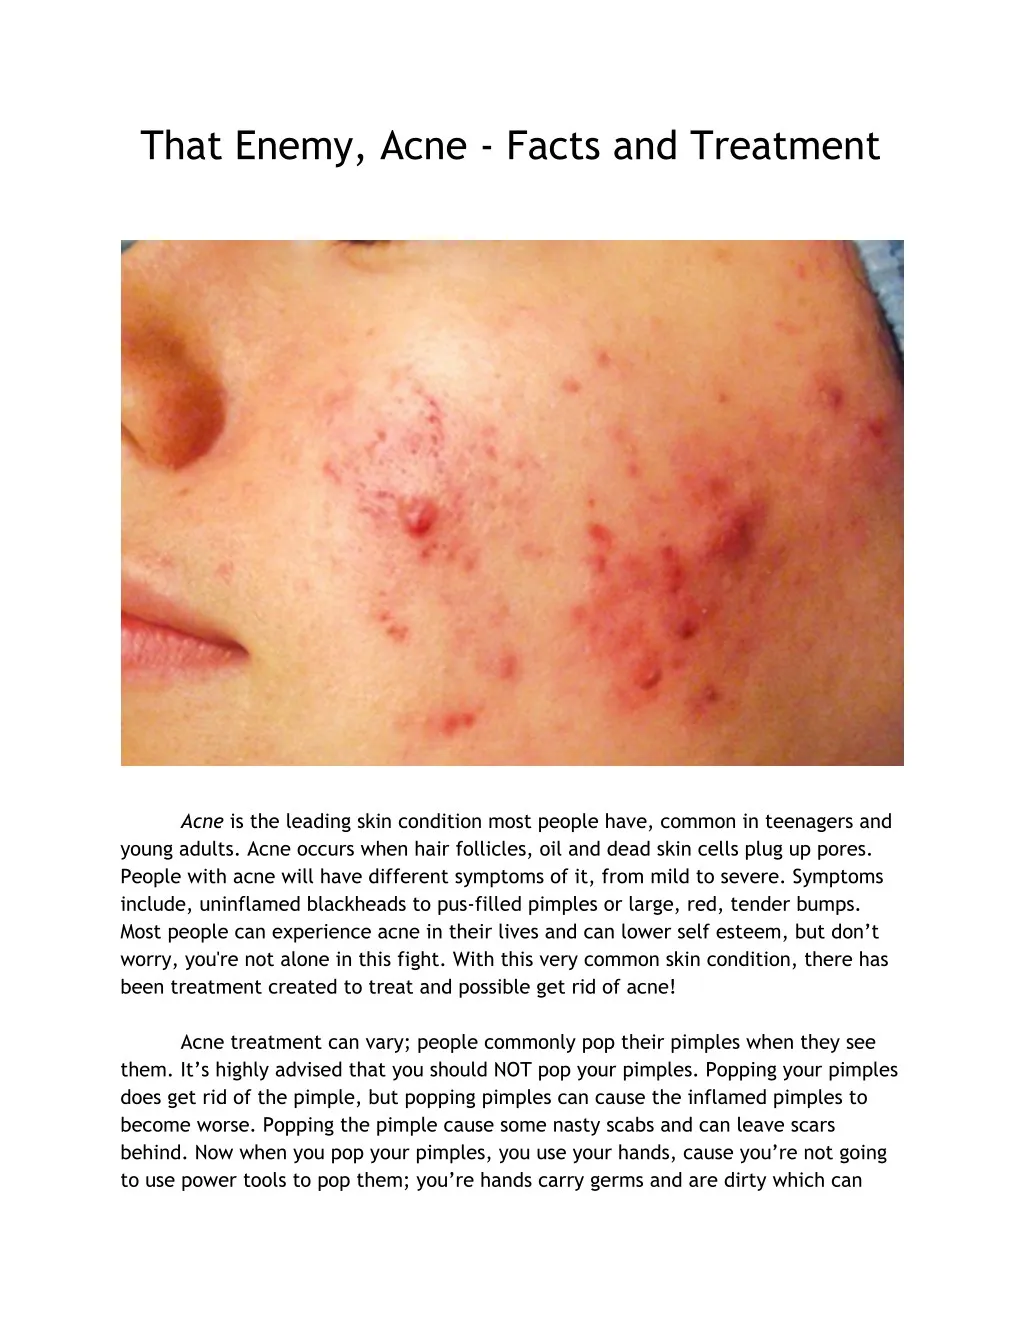 that enemy acne facts and treatment